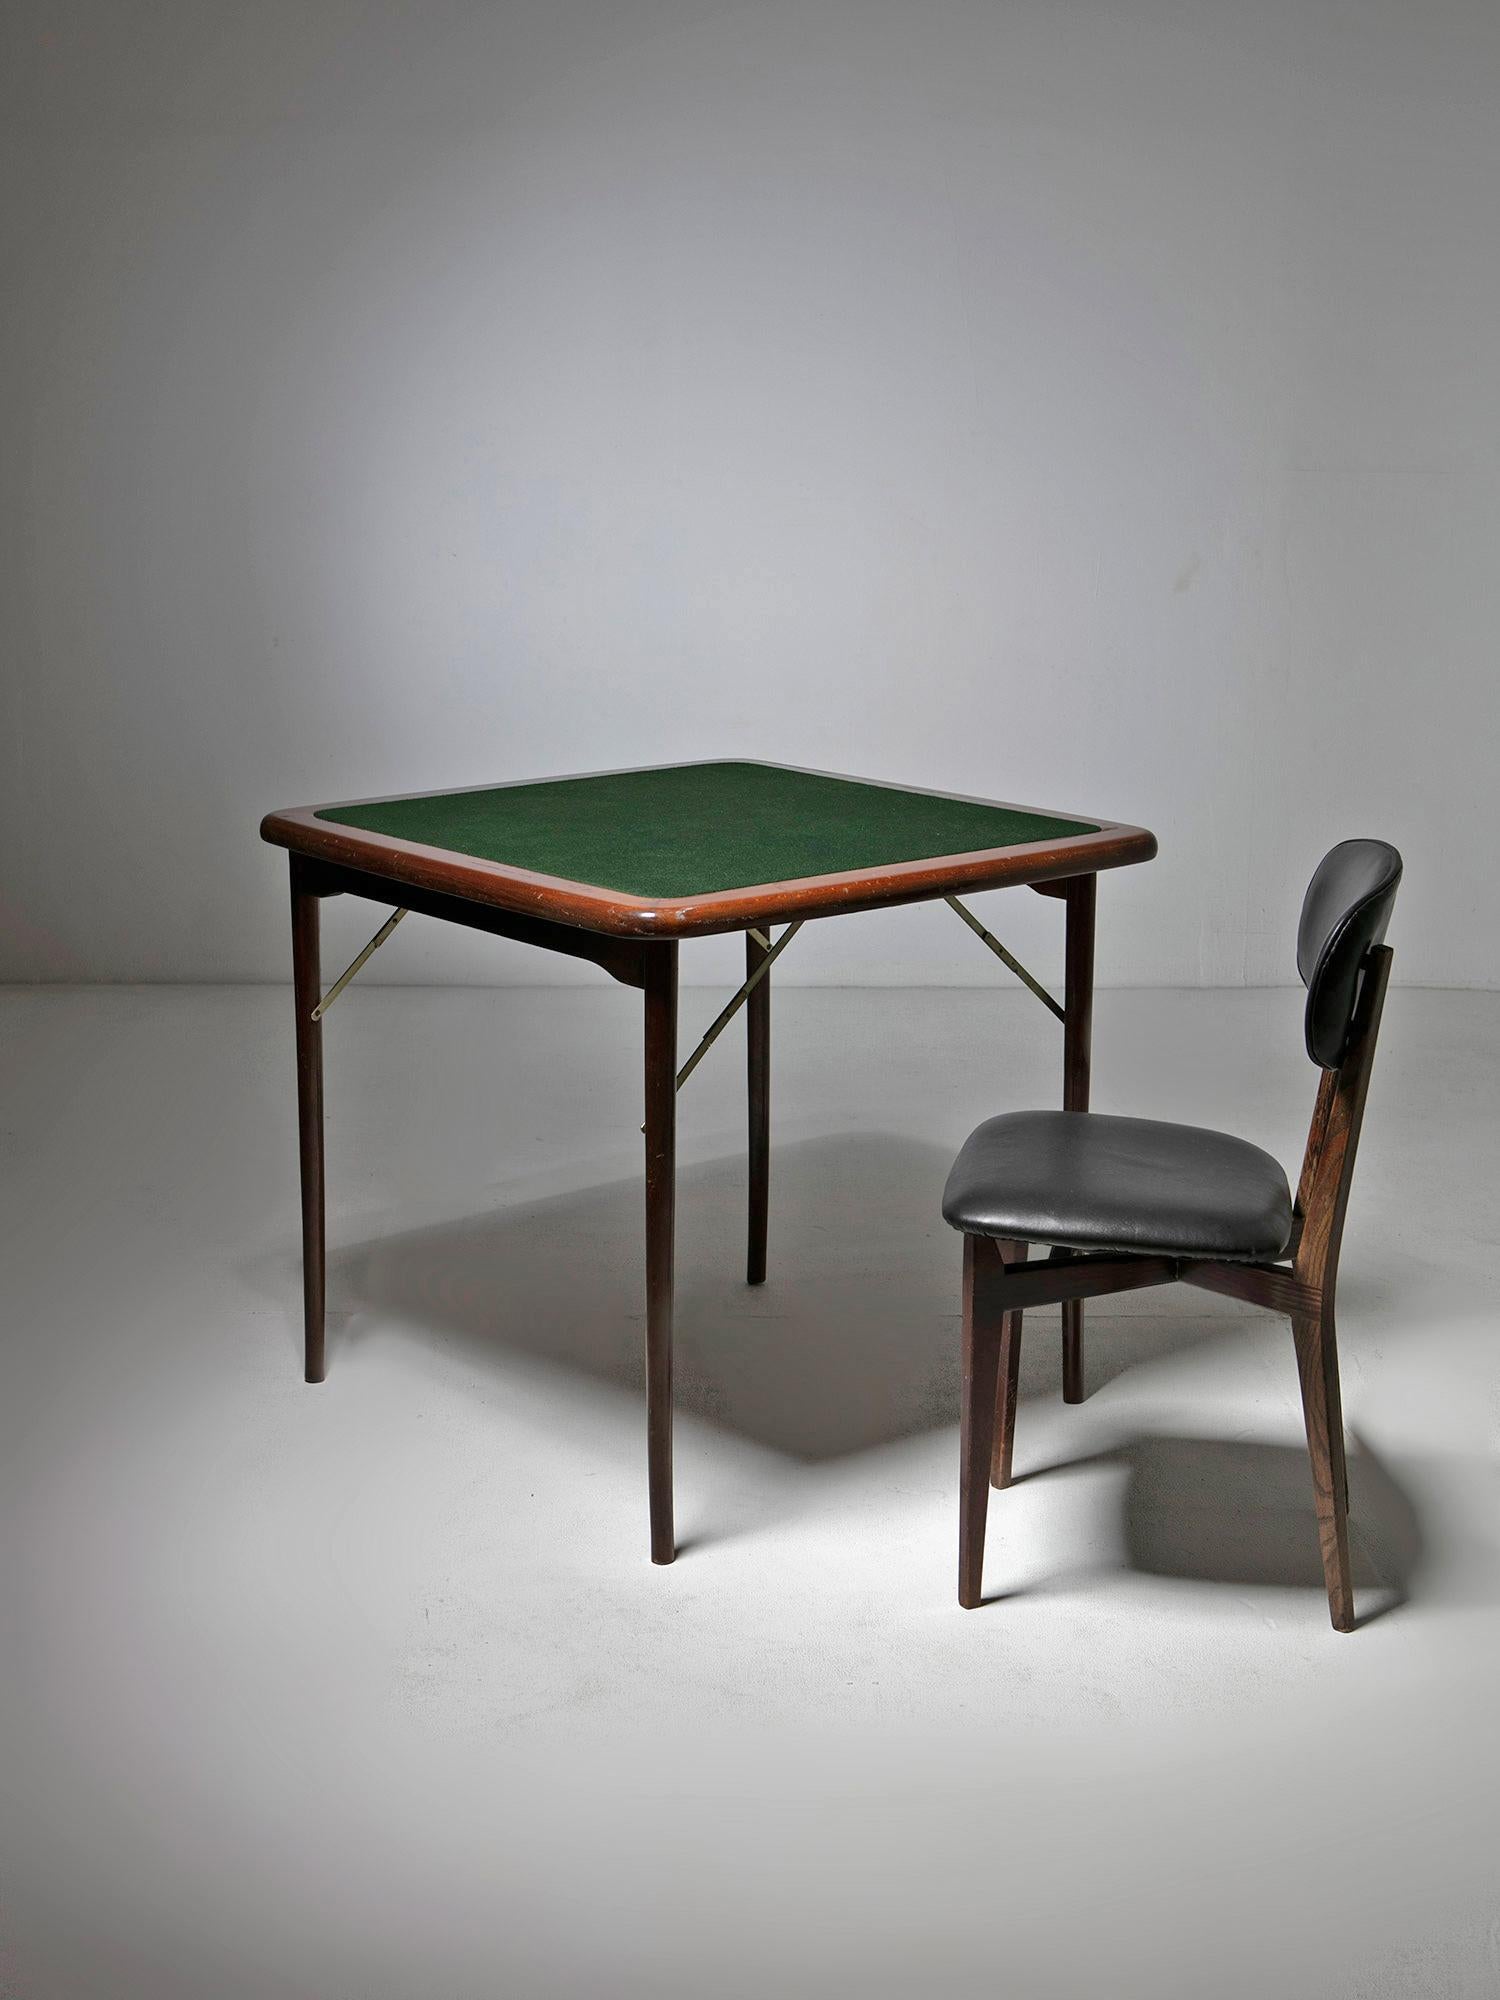 Wood and Cloth Folding Game Table, Italy, 1960s For Sale 2